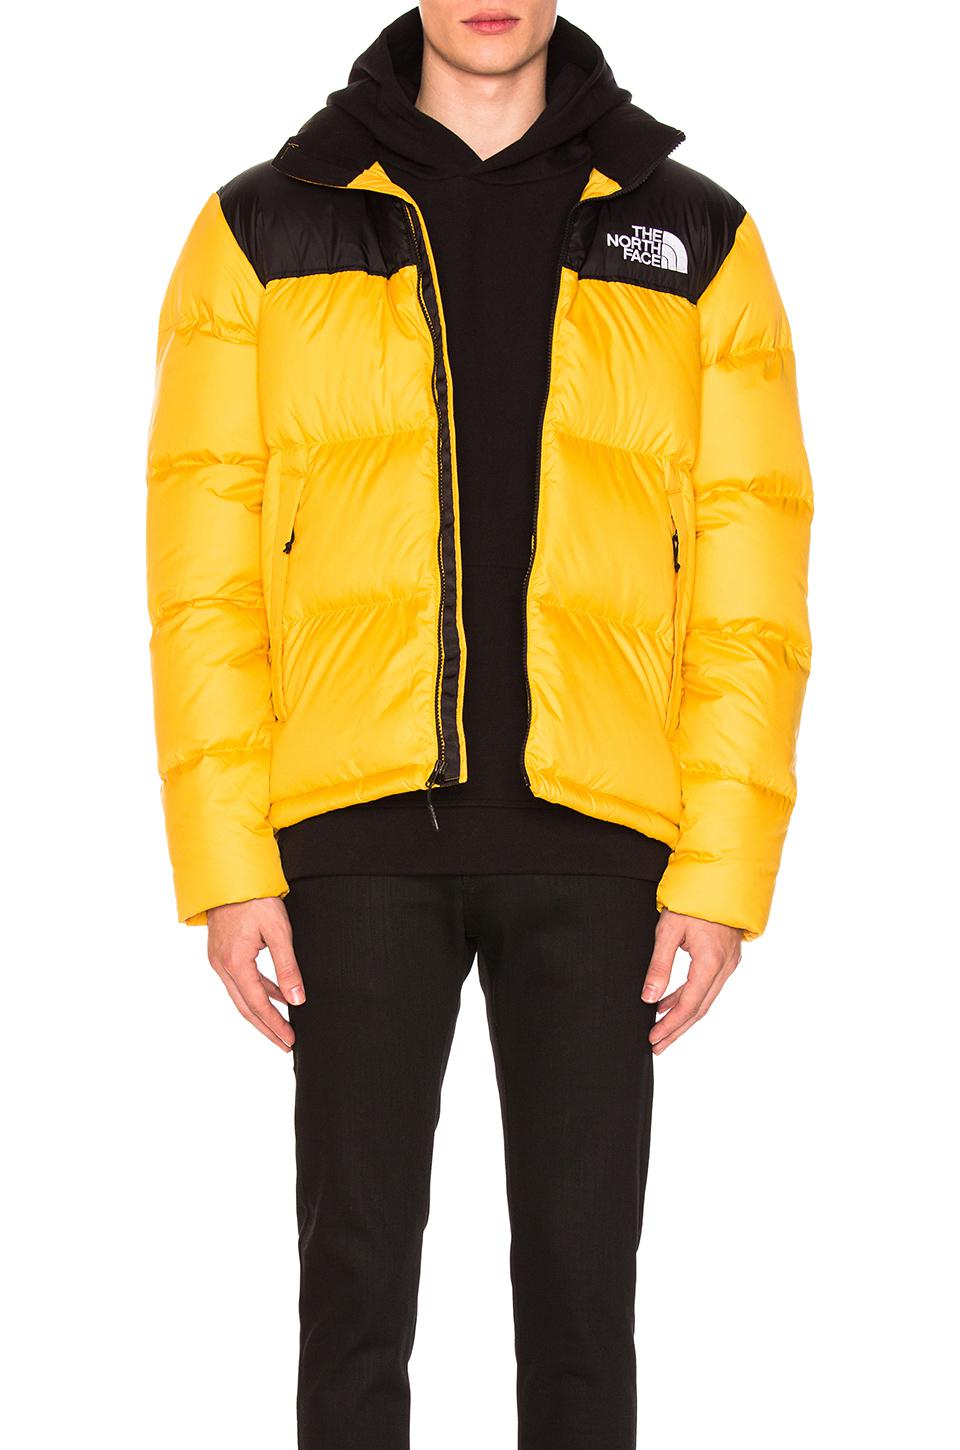 The north face down jacket yellow men's